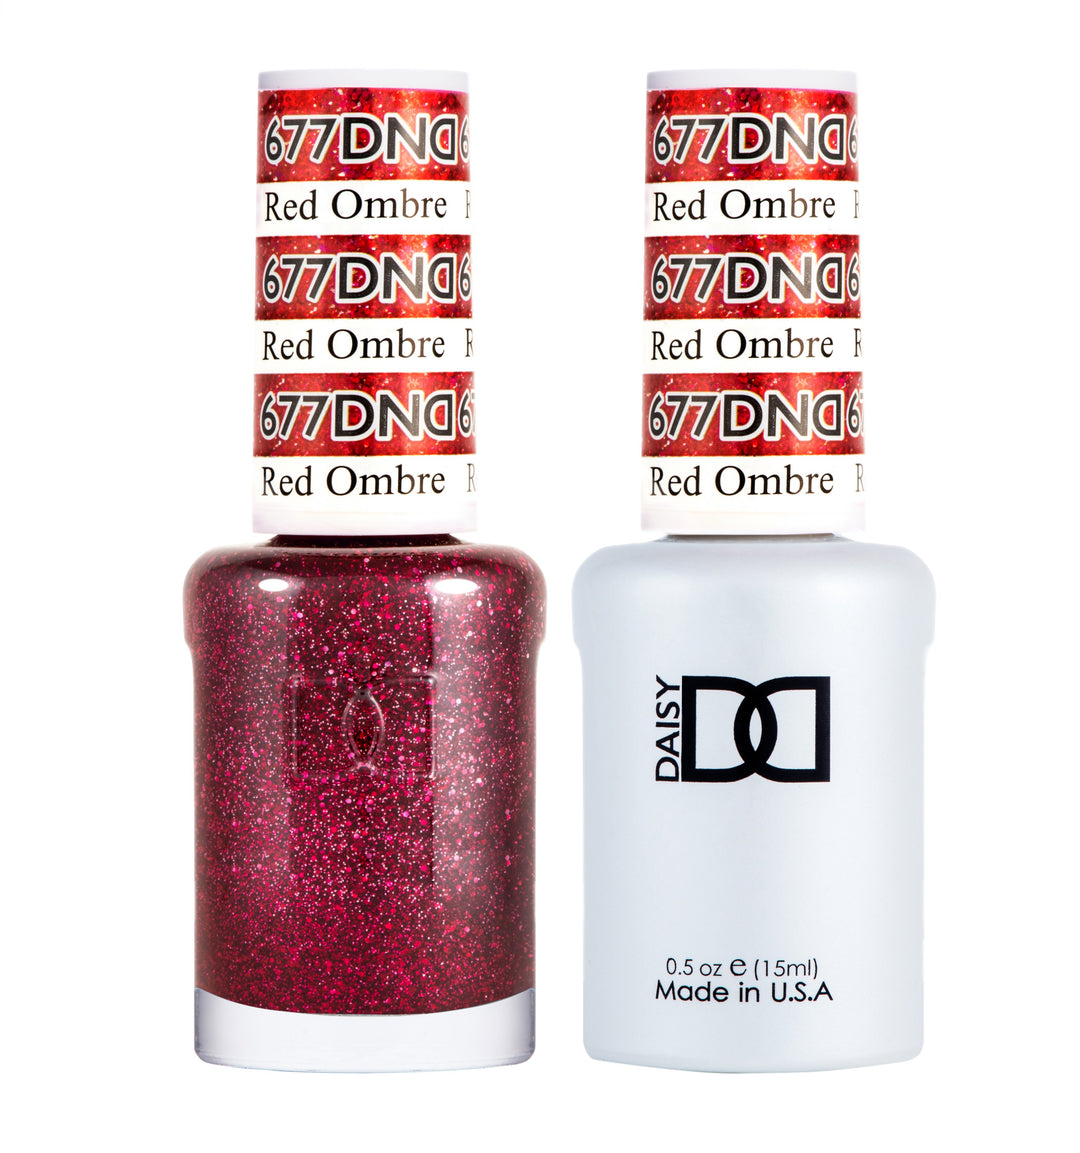 DND DUO Nail Lacquer and UV|LED Gel Polish Red Ombre 677 (2 x 15ml)